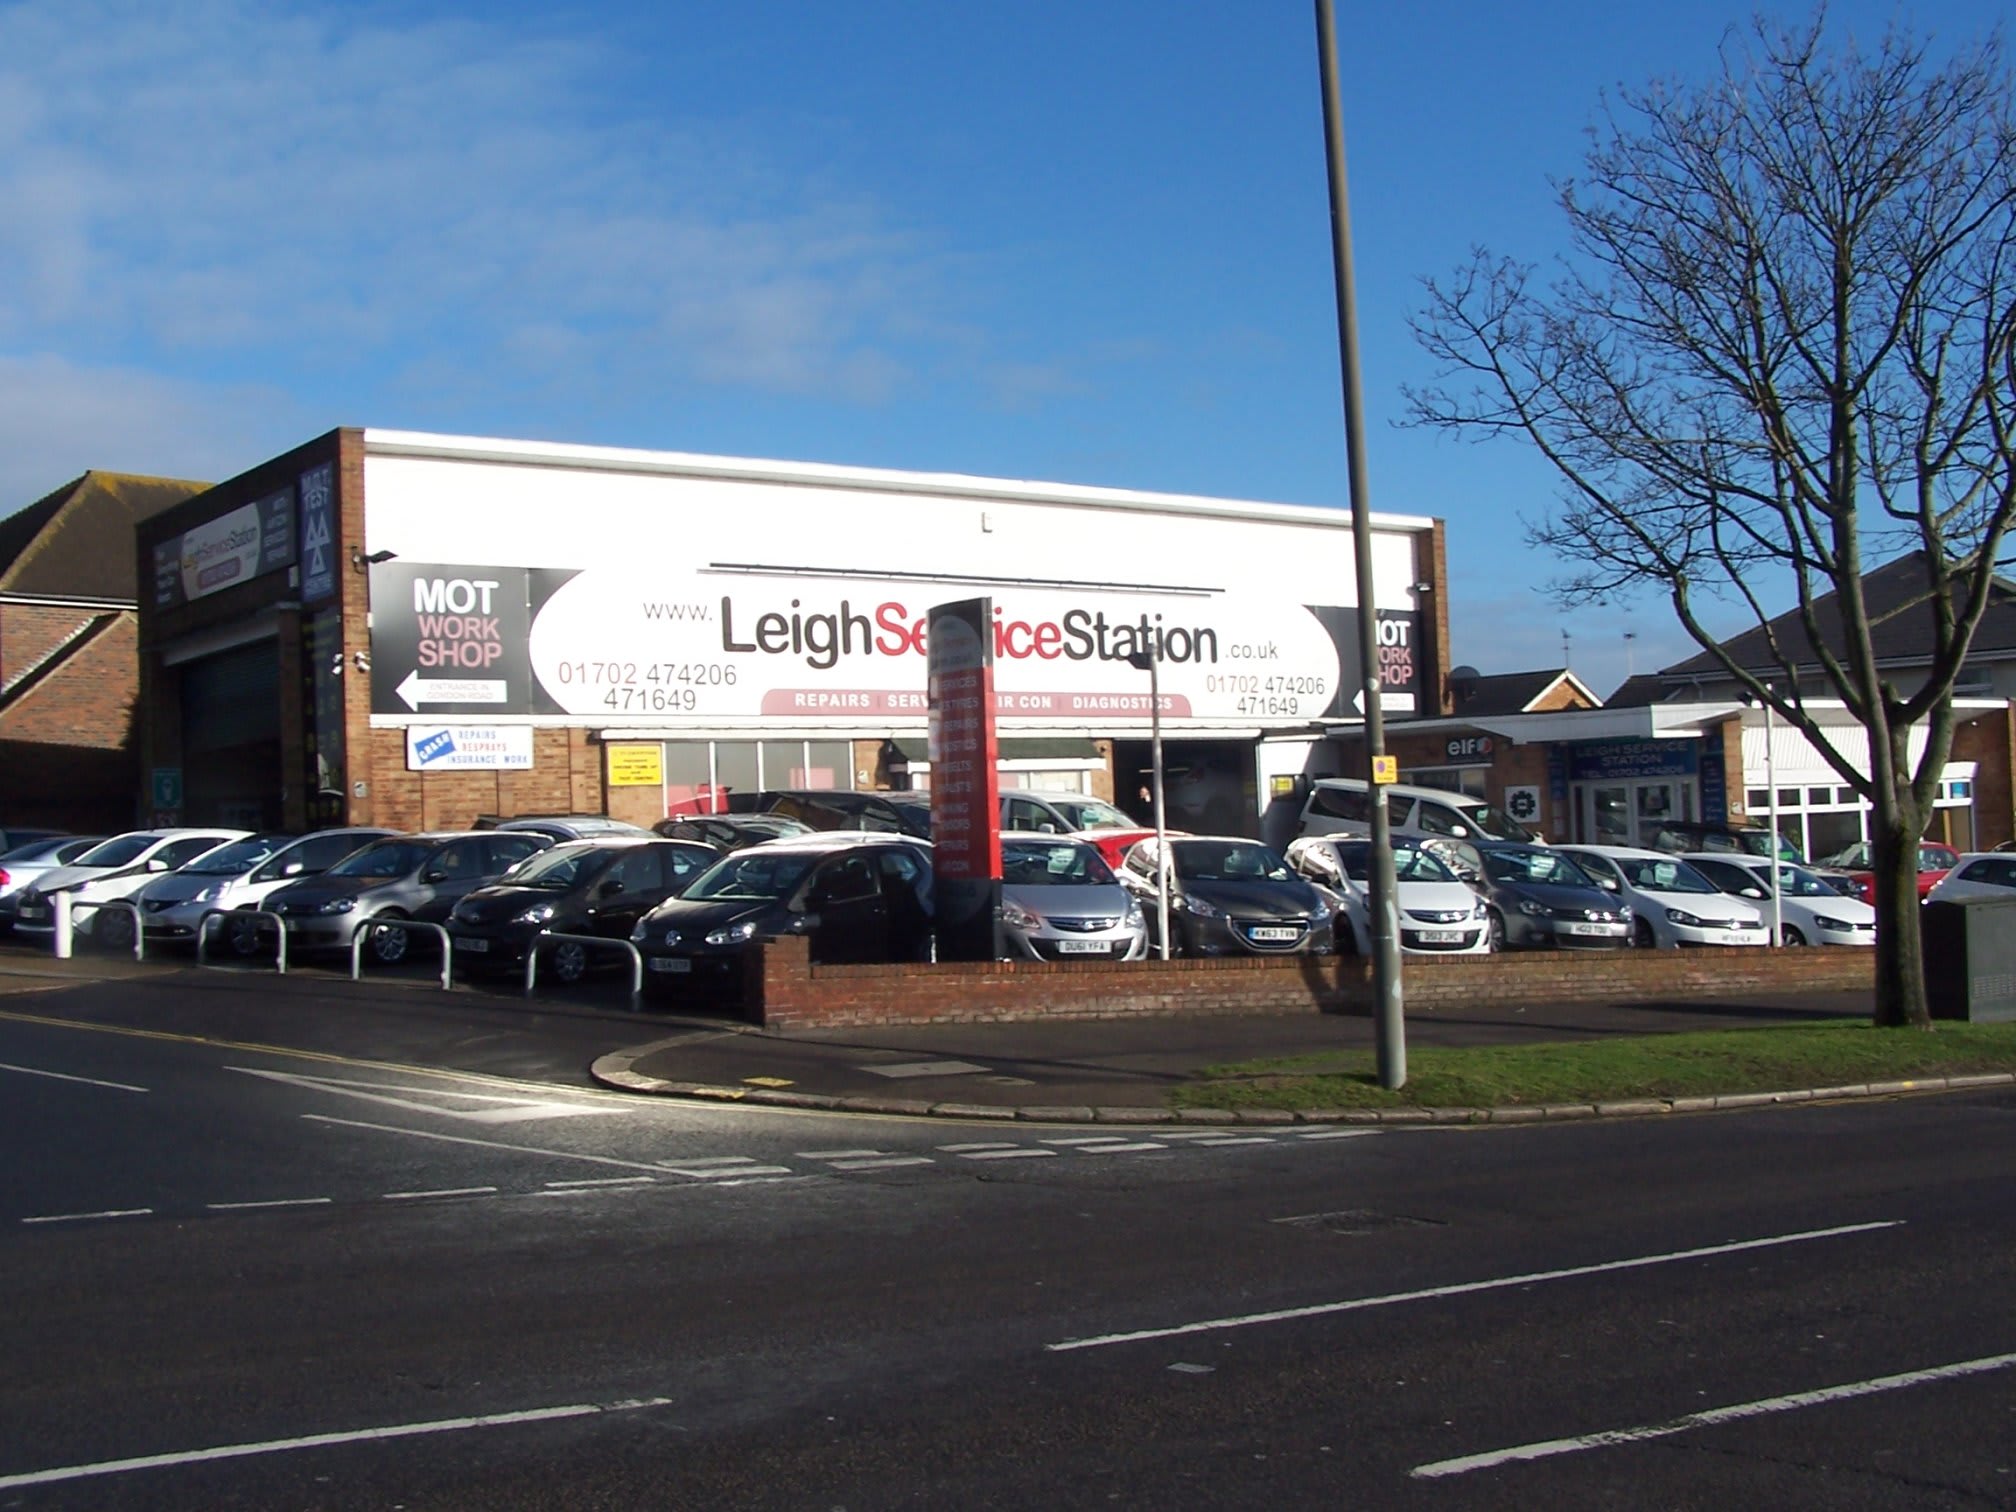 Images Leigh Service Station Ltd